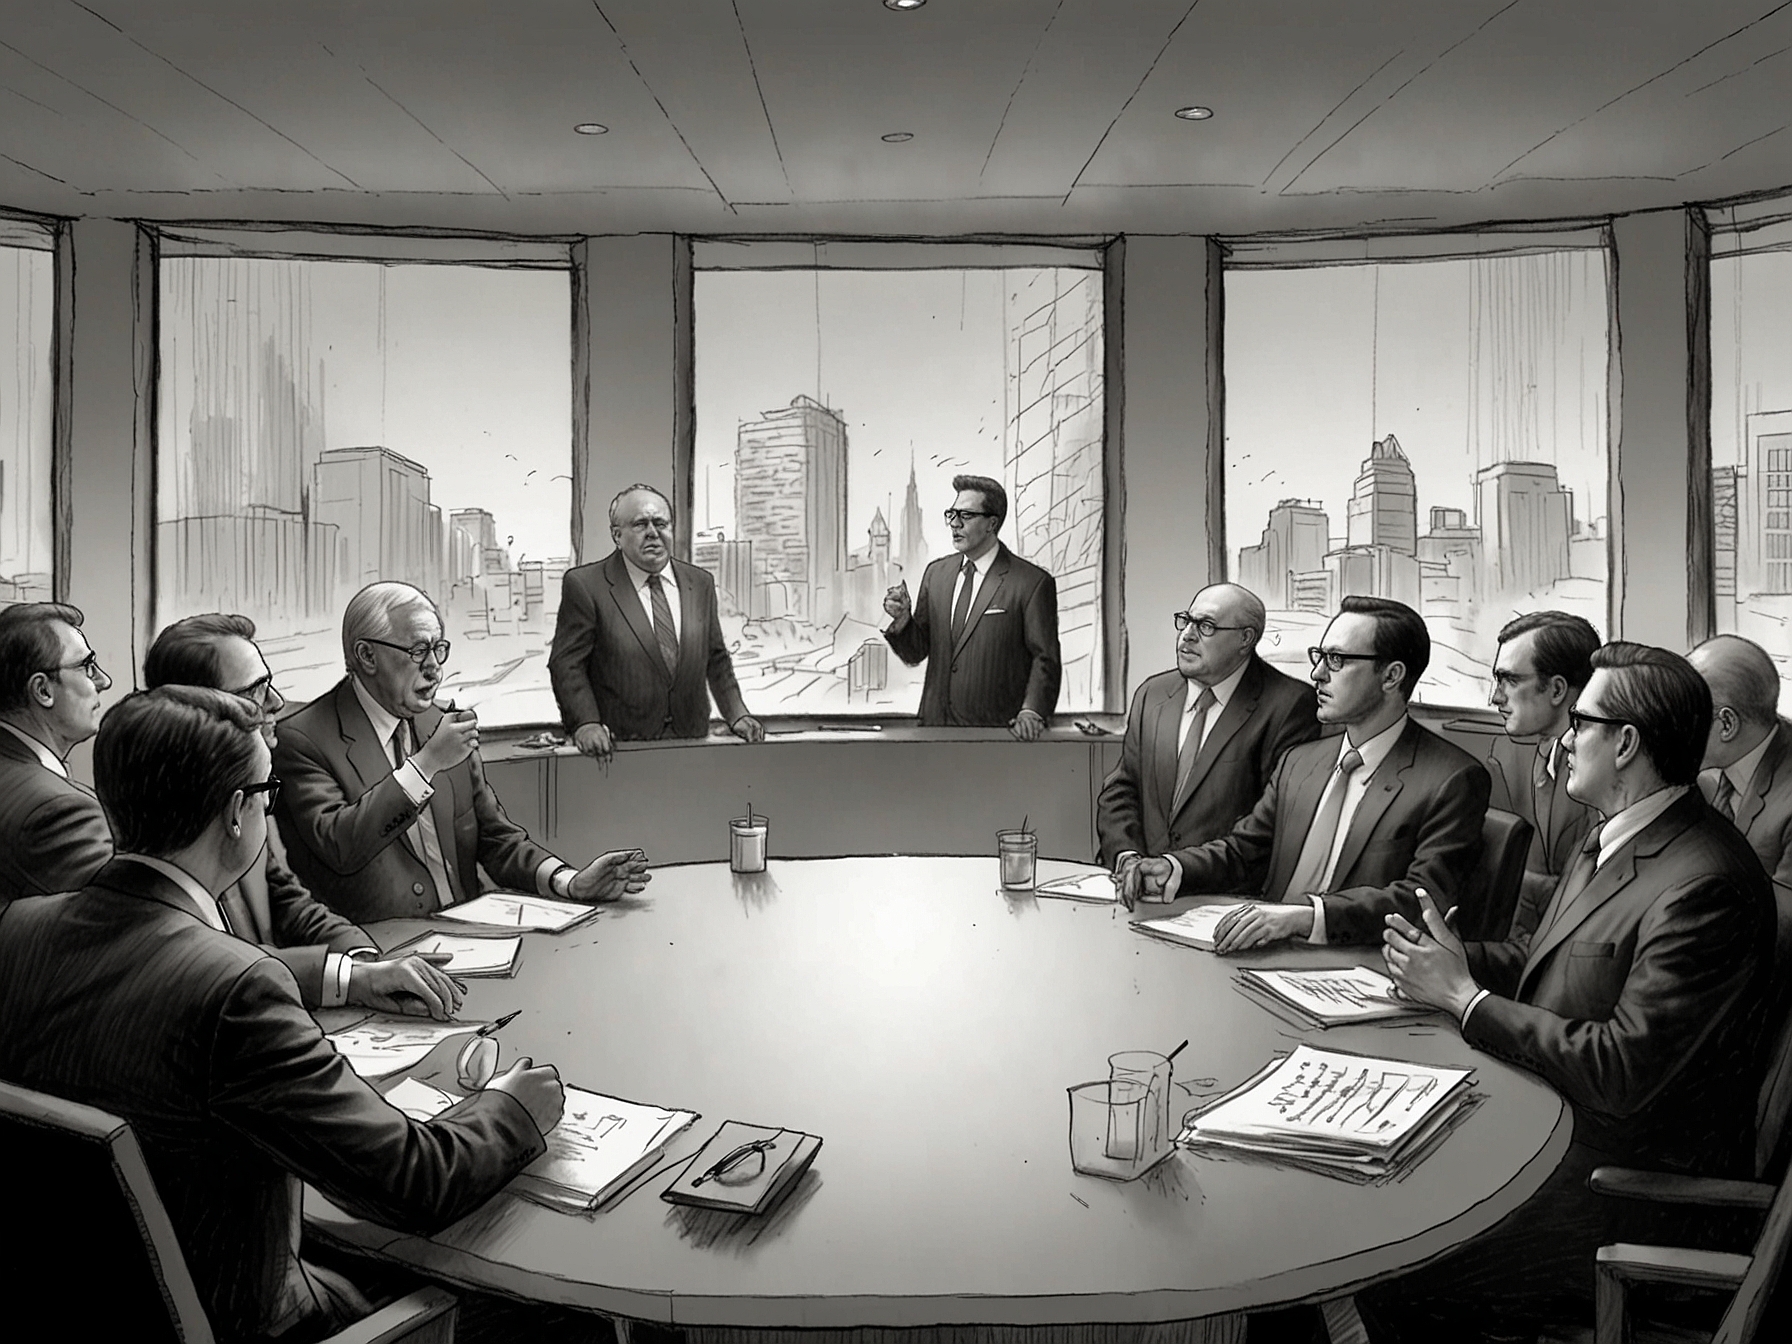 An image of a heated debate during a shareholder meeting, symbolizing the intense proxy battle between Saba Capital and BlackRock over closed-end fund governance.